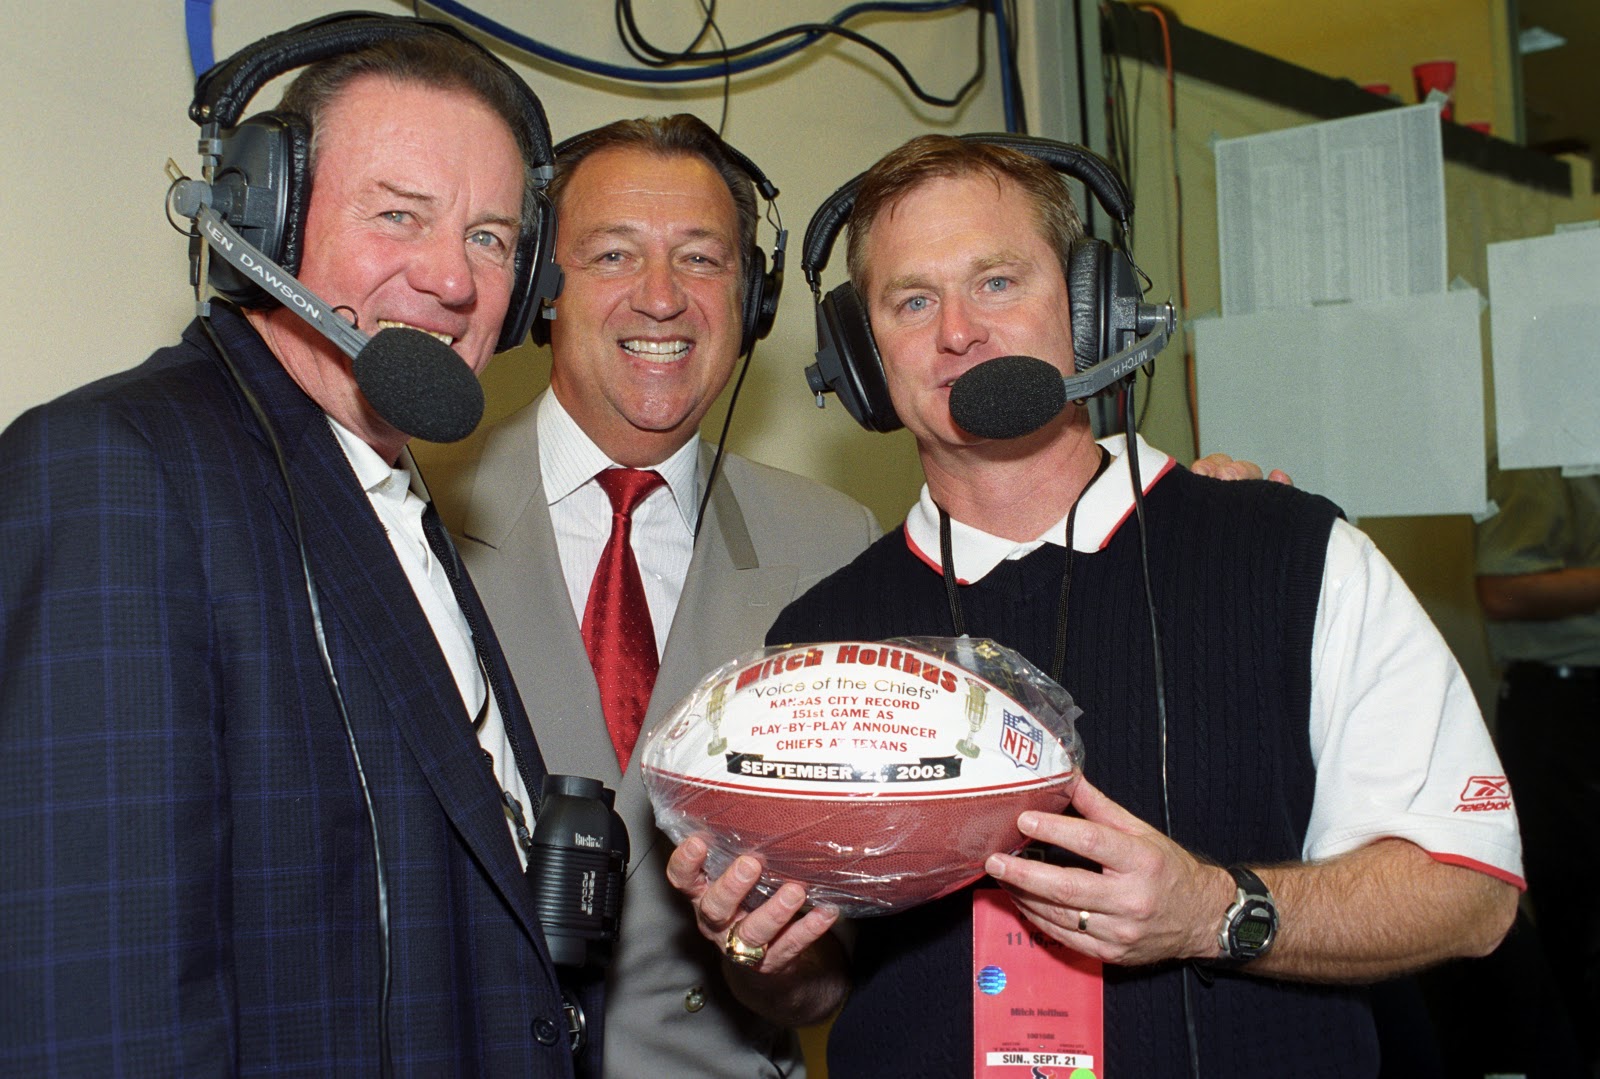 Holtus poses with Len Dawson and Carl Peterson, posing with a commemorative ball to celebrate Holtus's 151st game called.